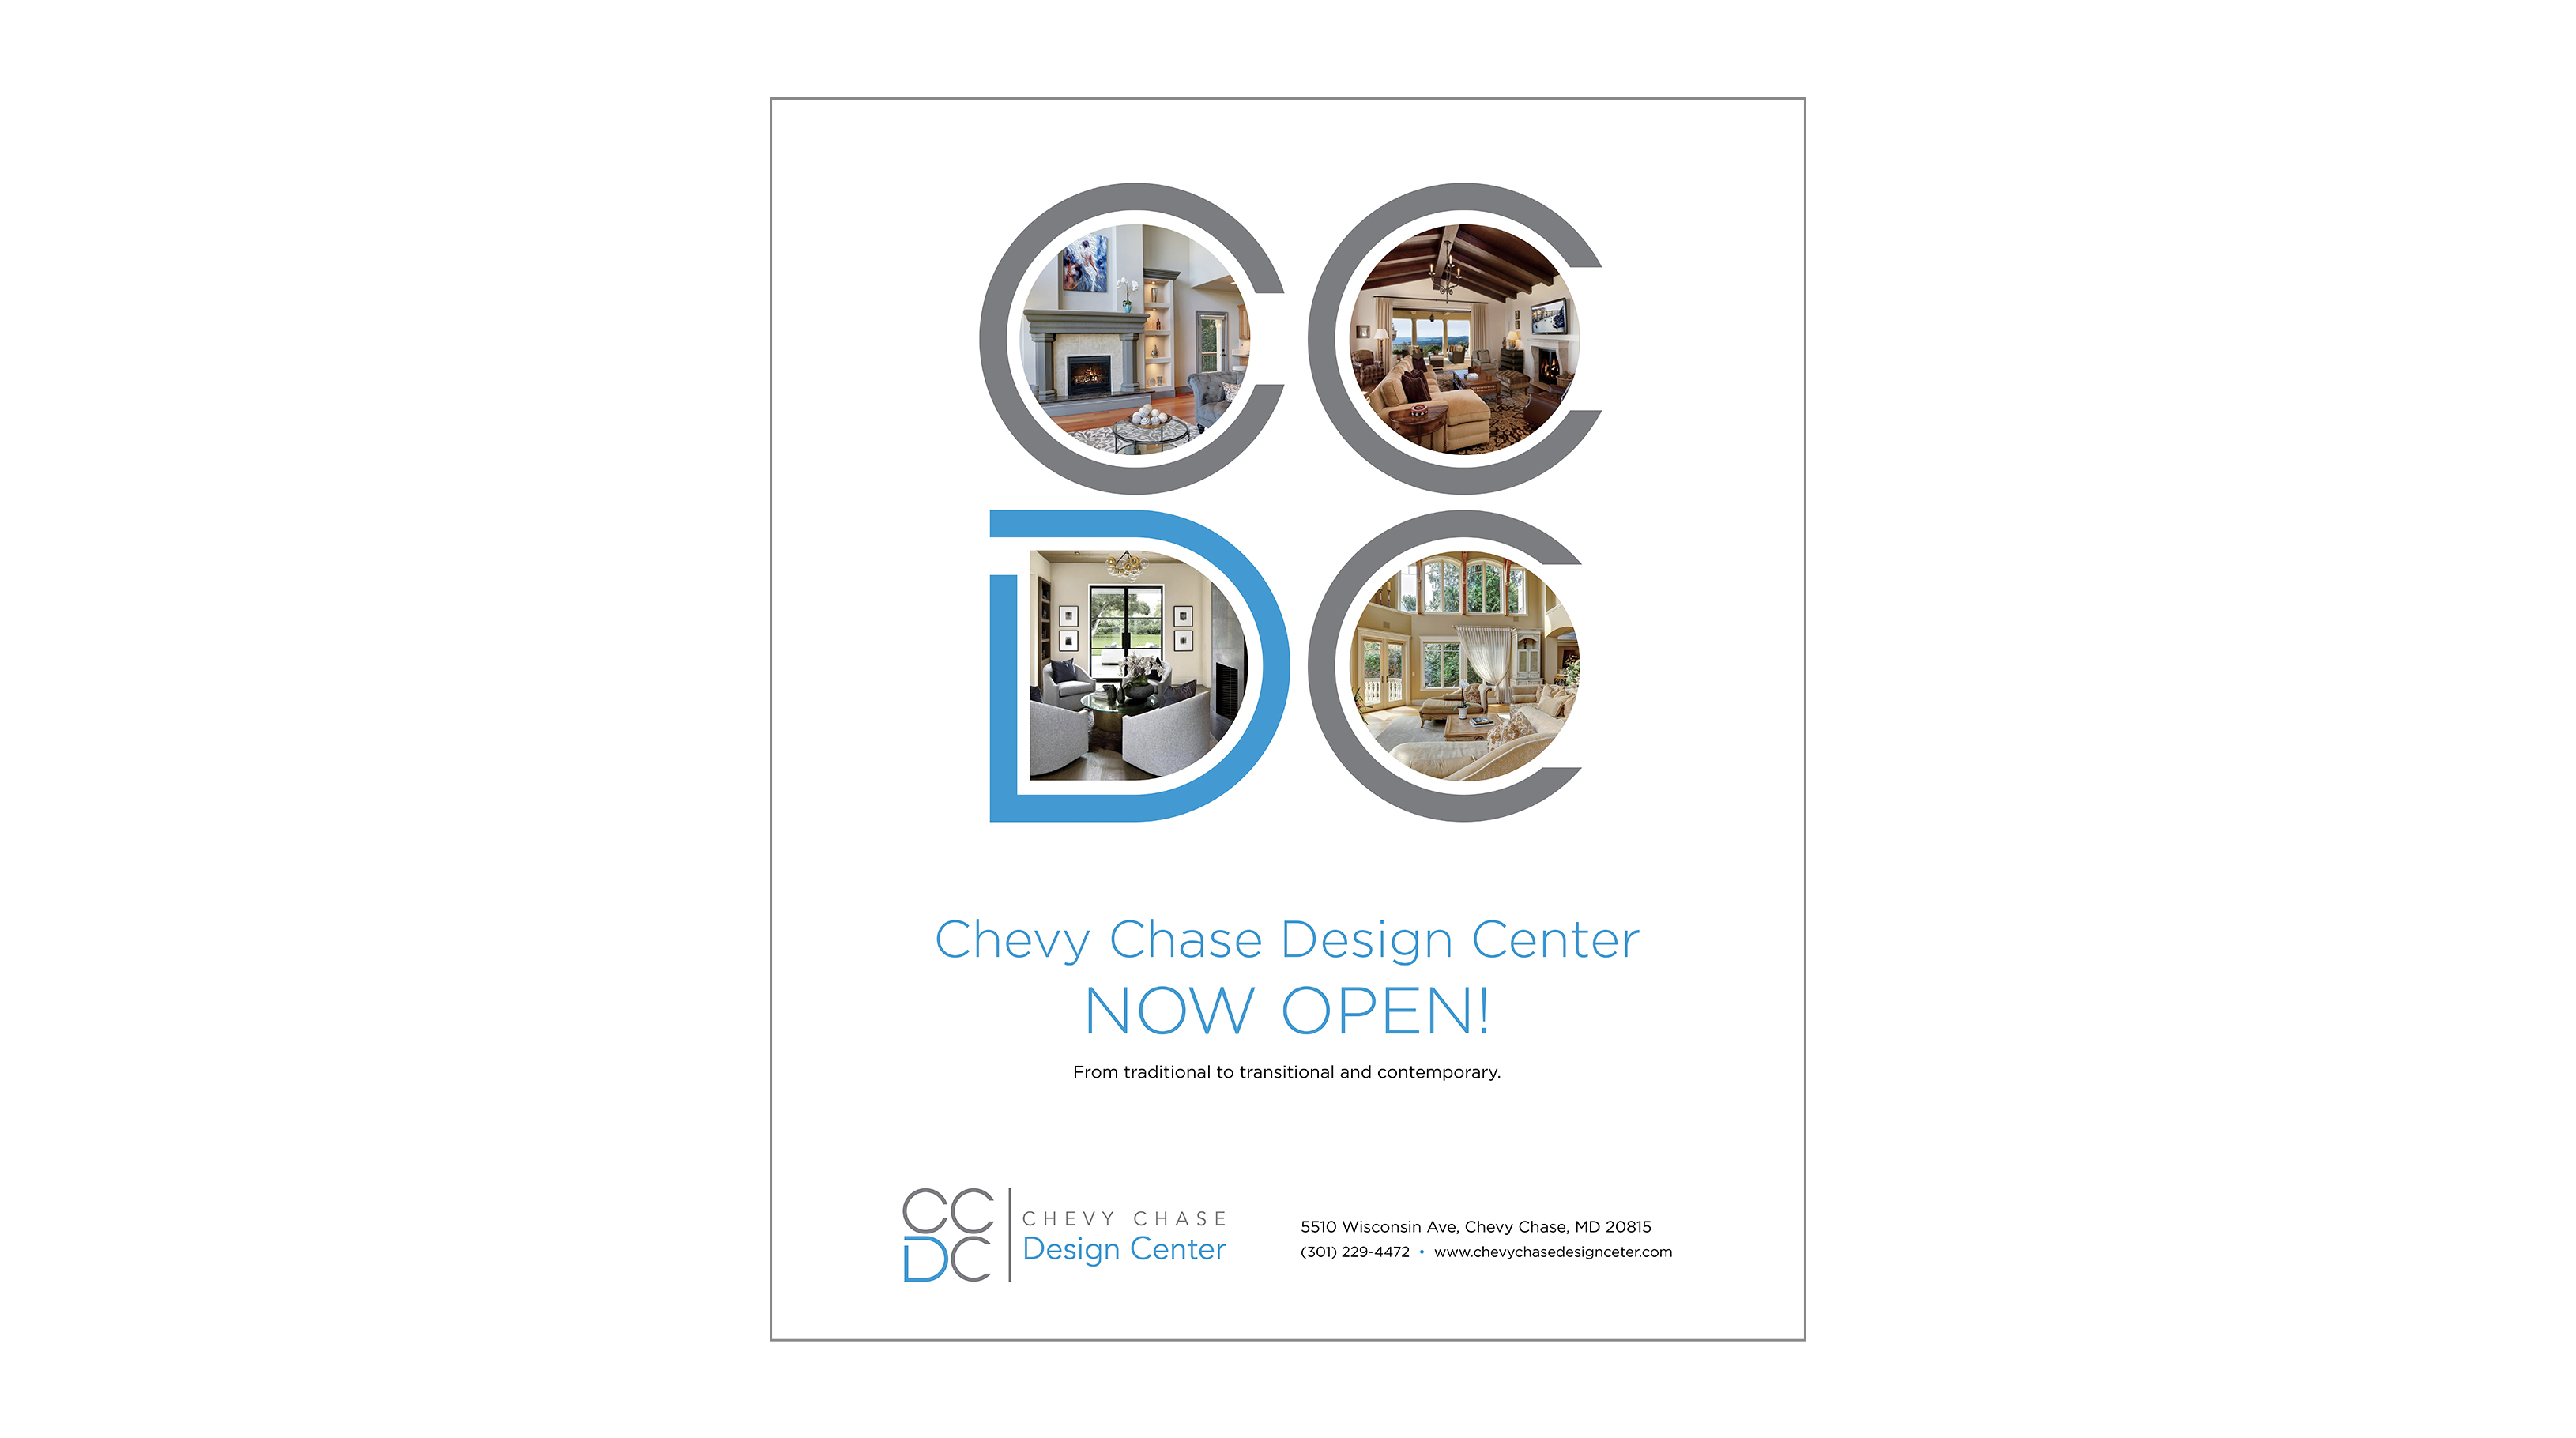 Chevy Chase Design Center ad